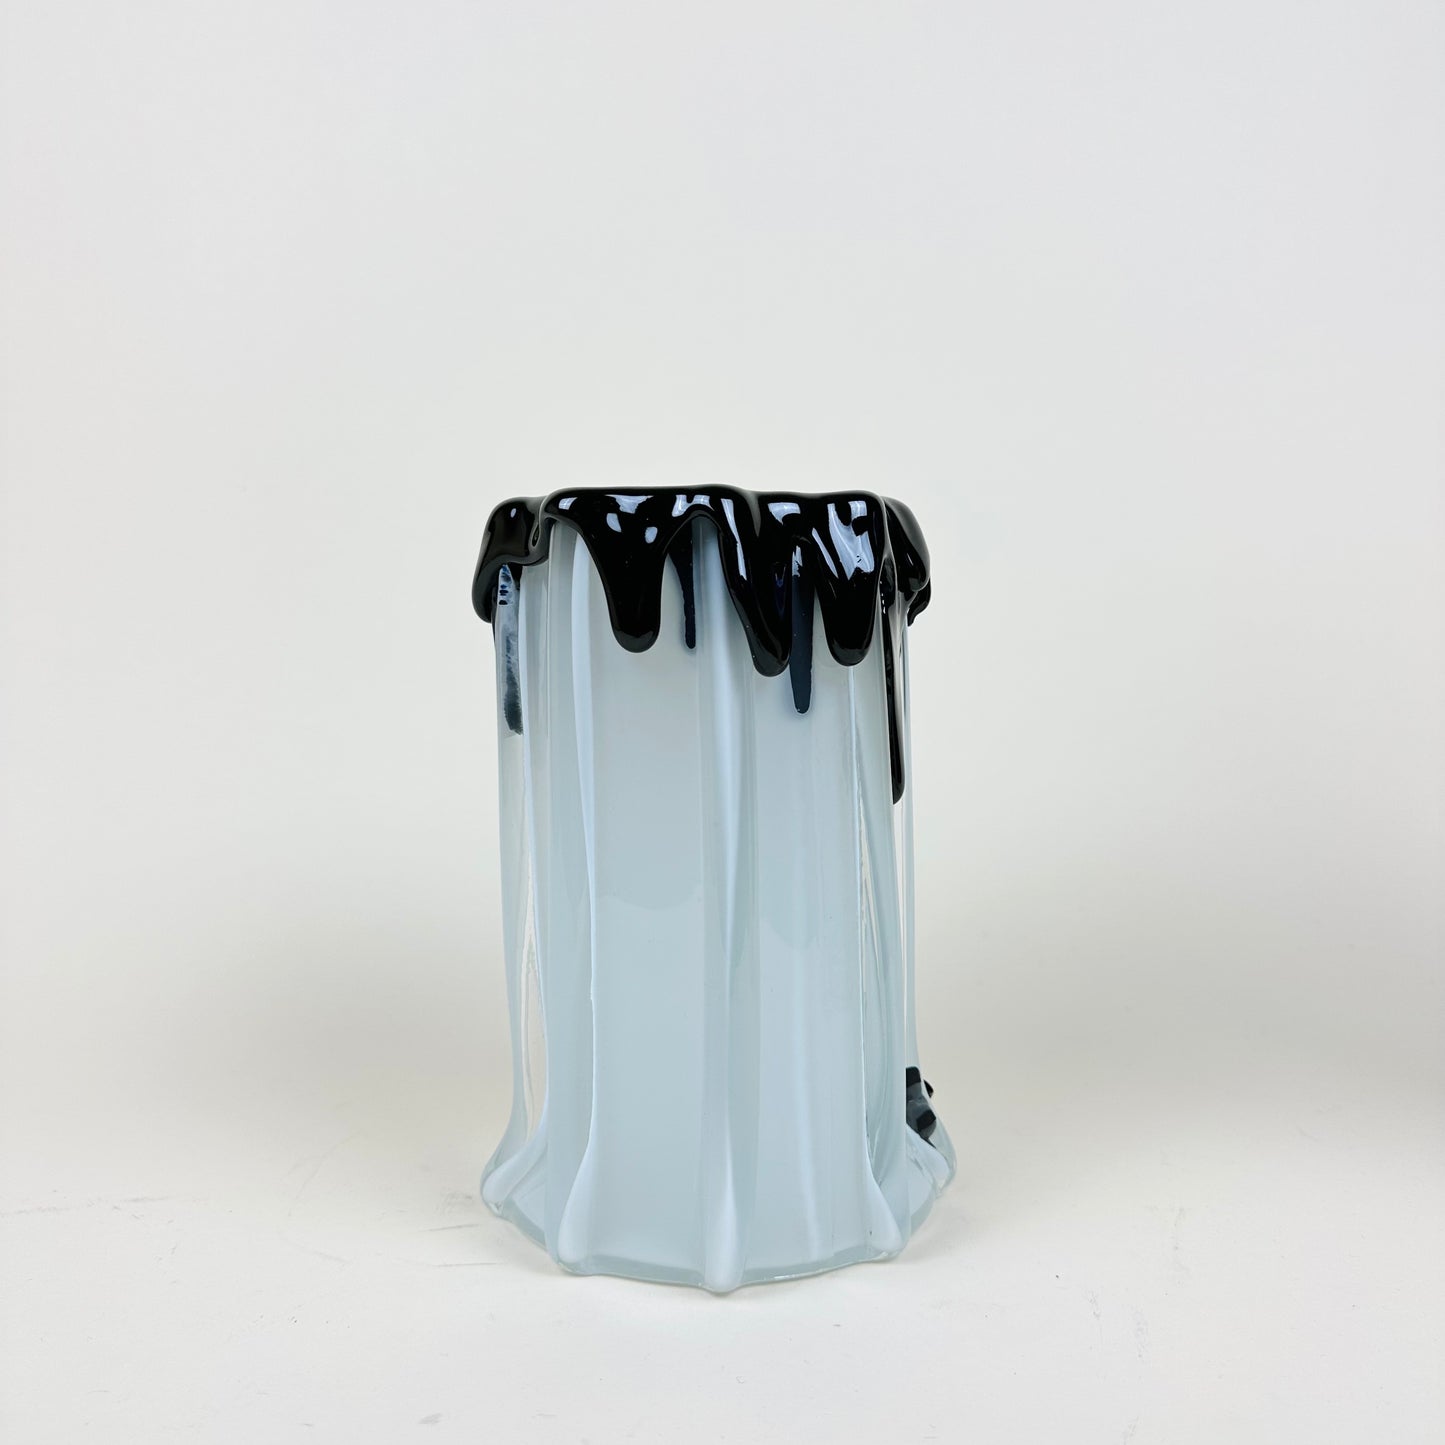 White and black glass vase by Silje Lindrup